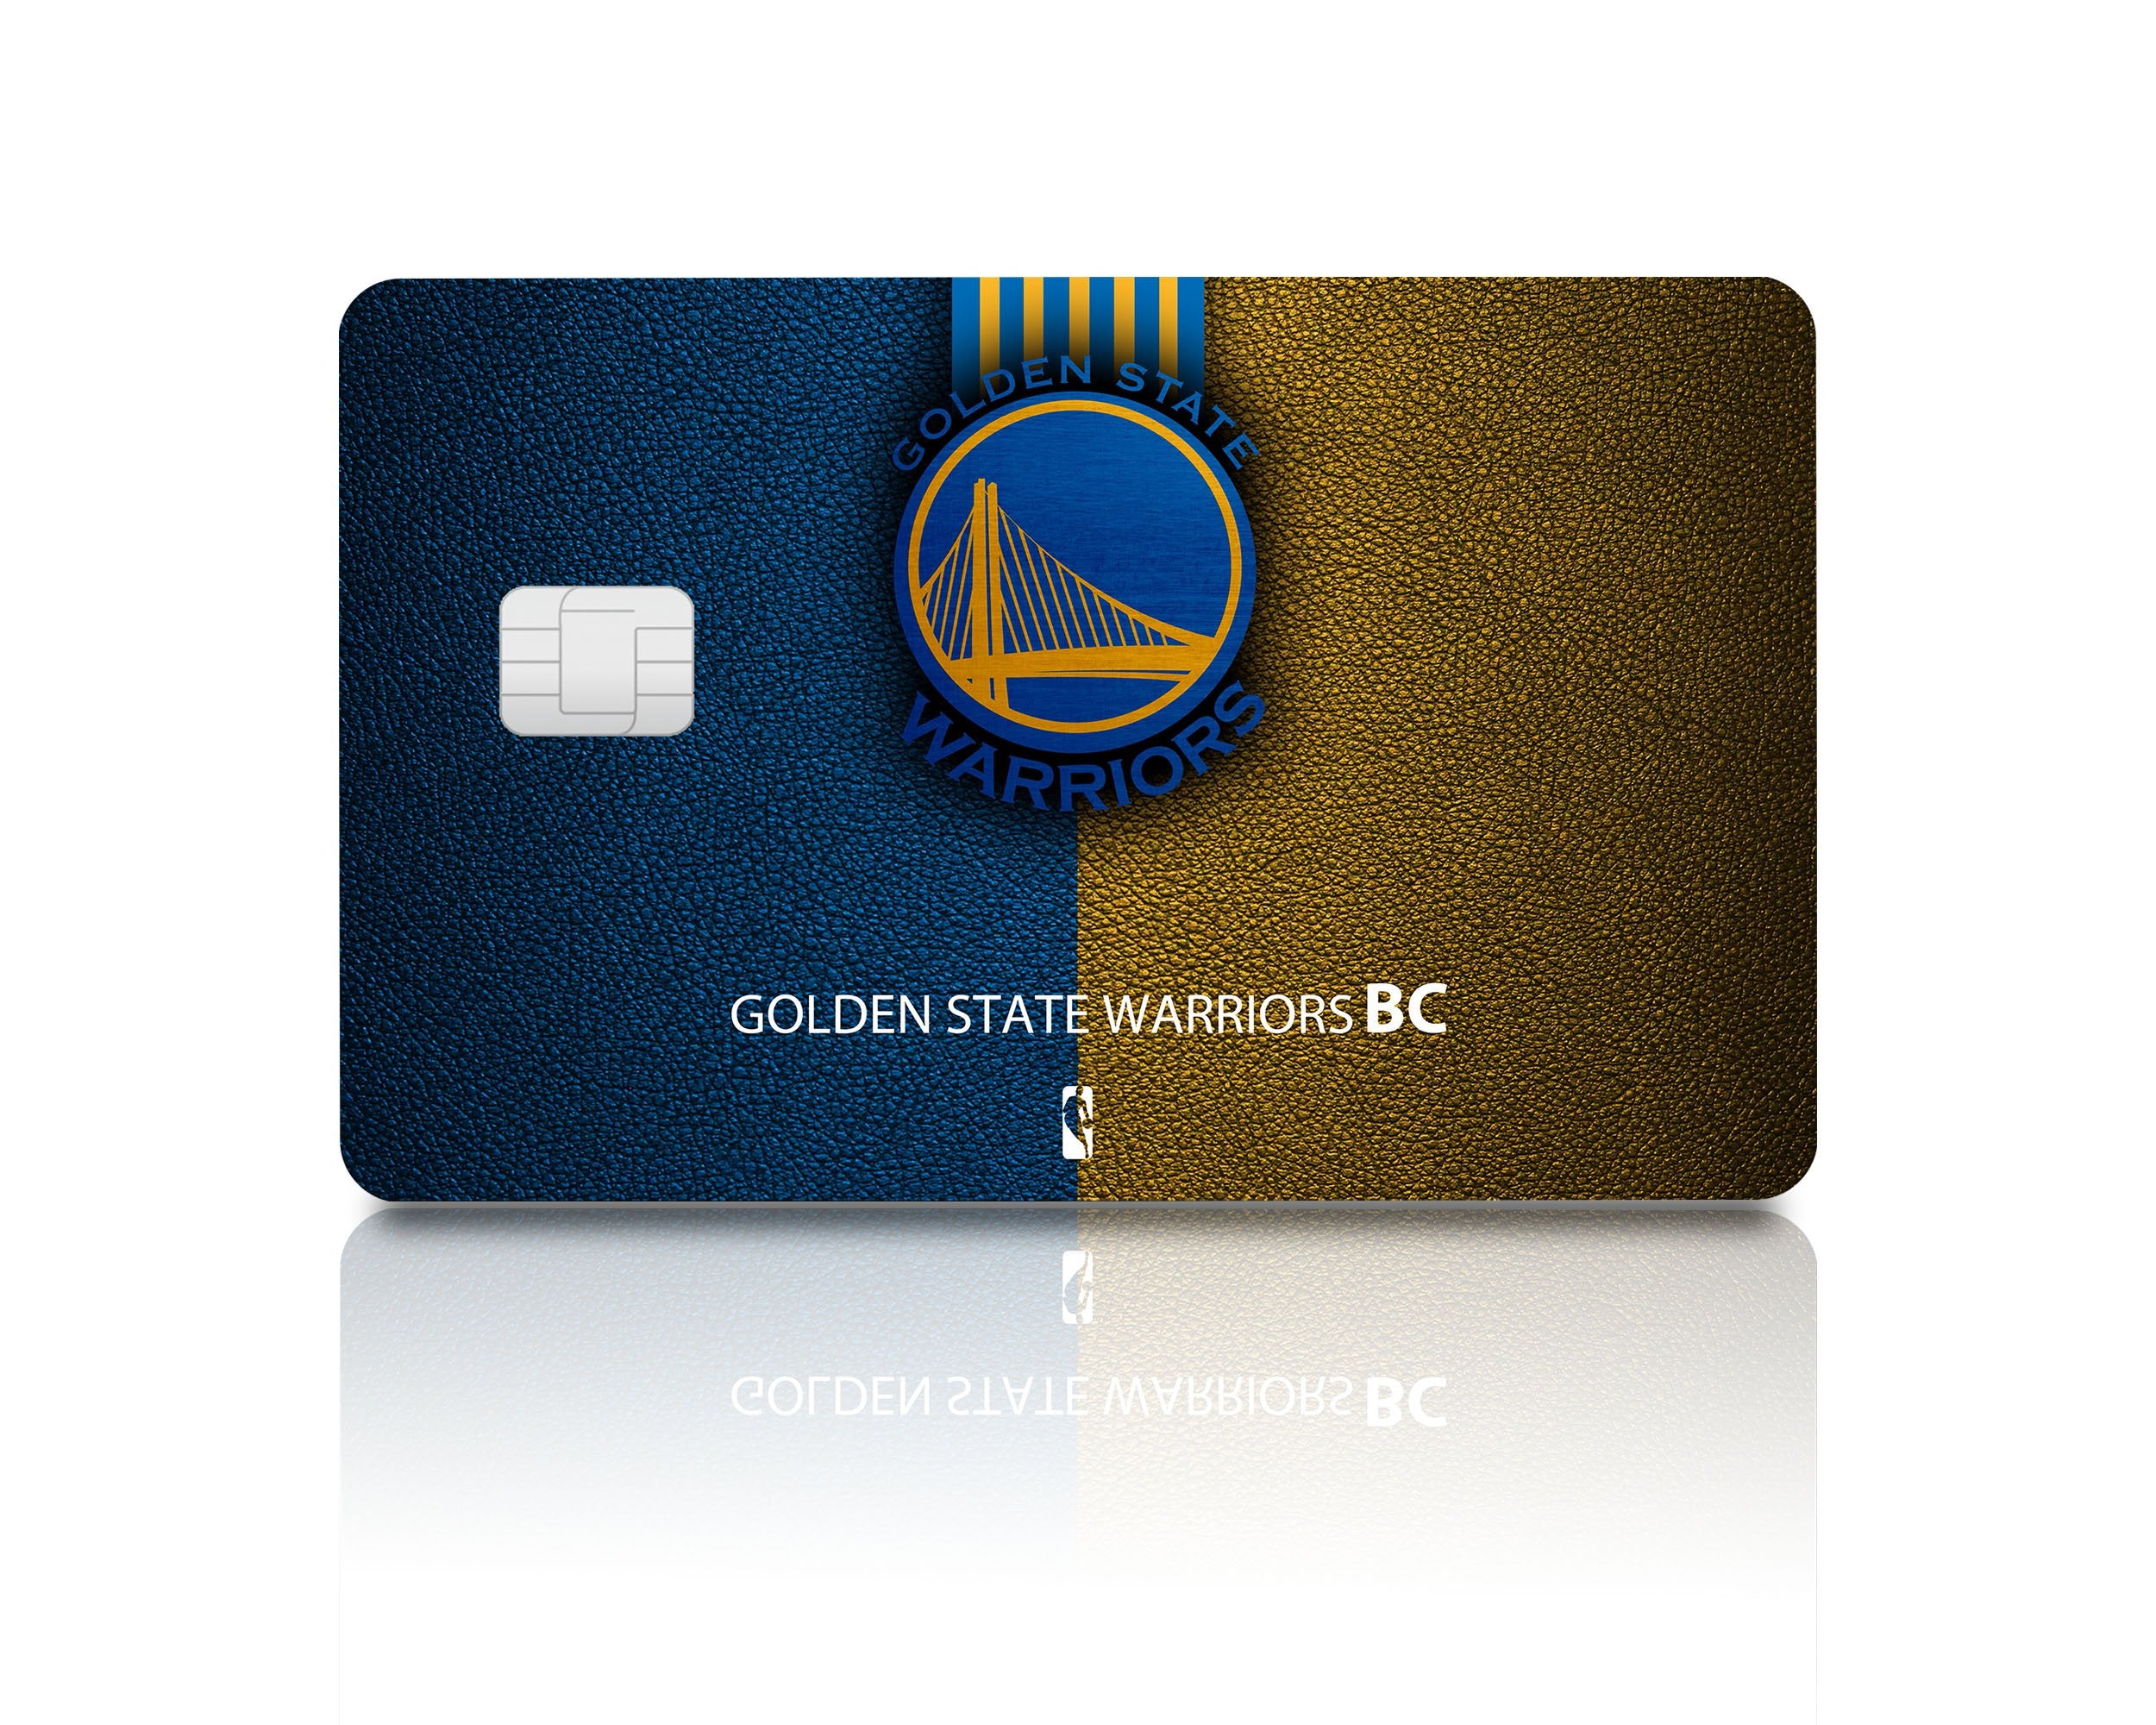 Credit Debit Card Skins | Cucu Covers - Customize Any Bank Card - 2022 NBA Champions: Golden State Warriors - Gold Ring, Full Cover / Large Chip